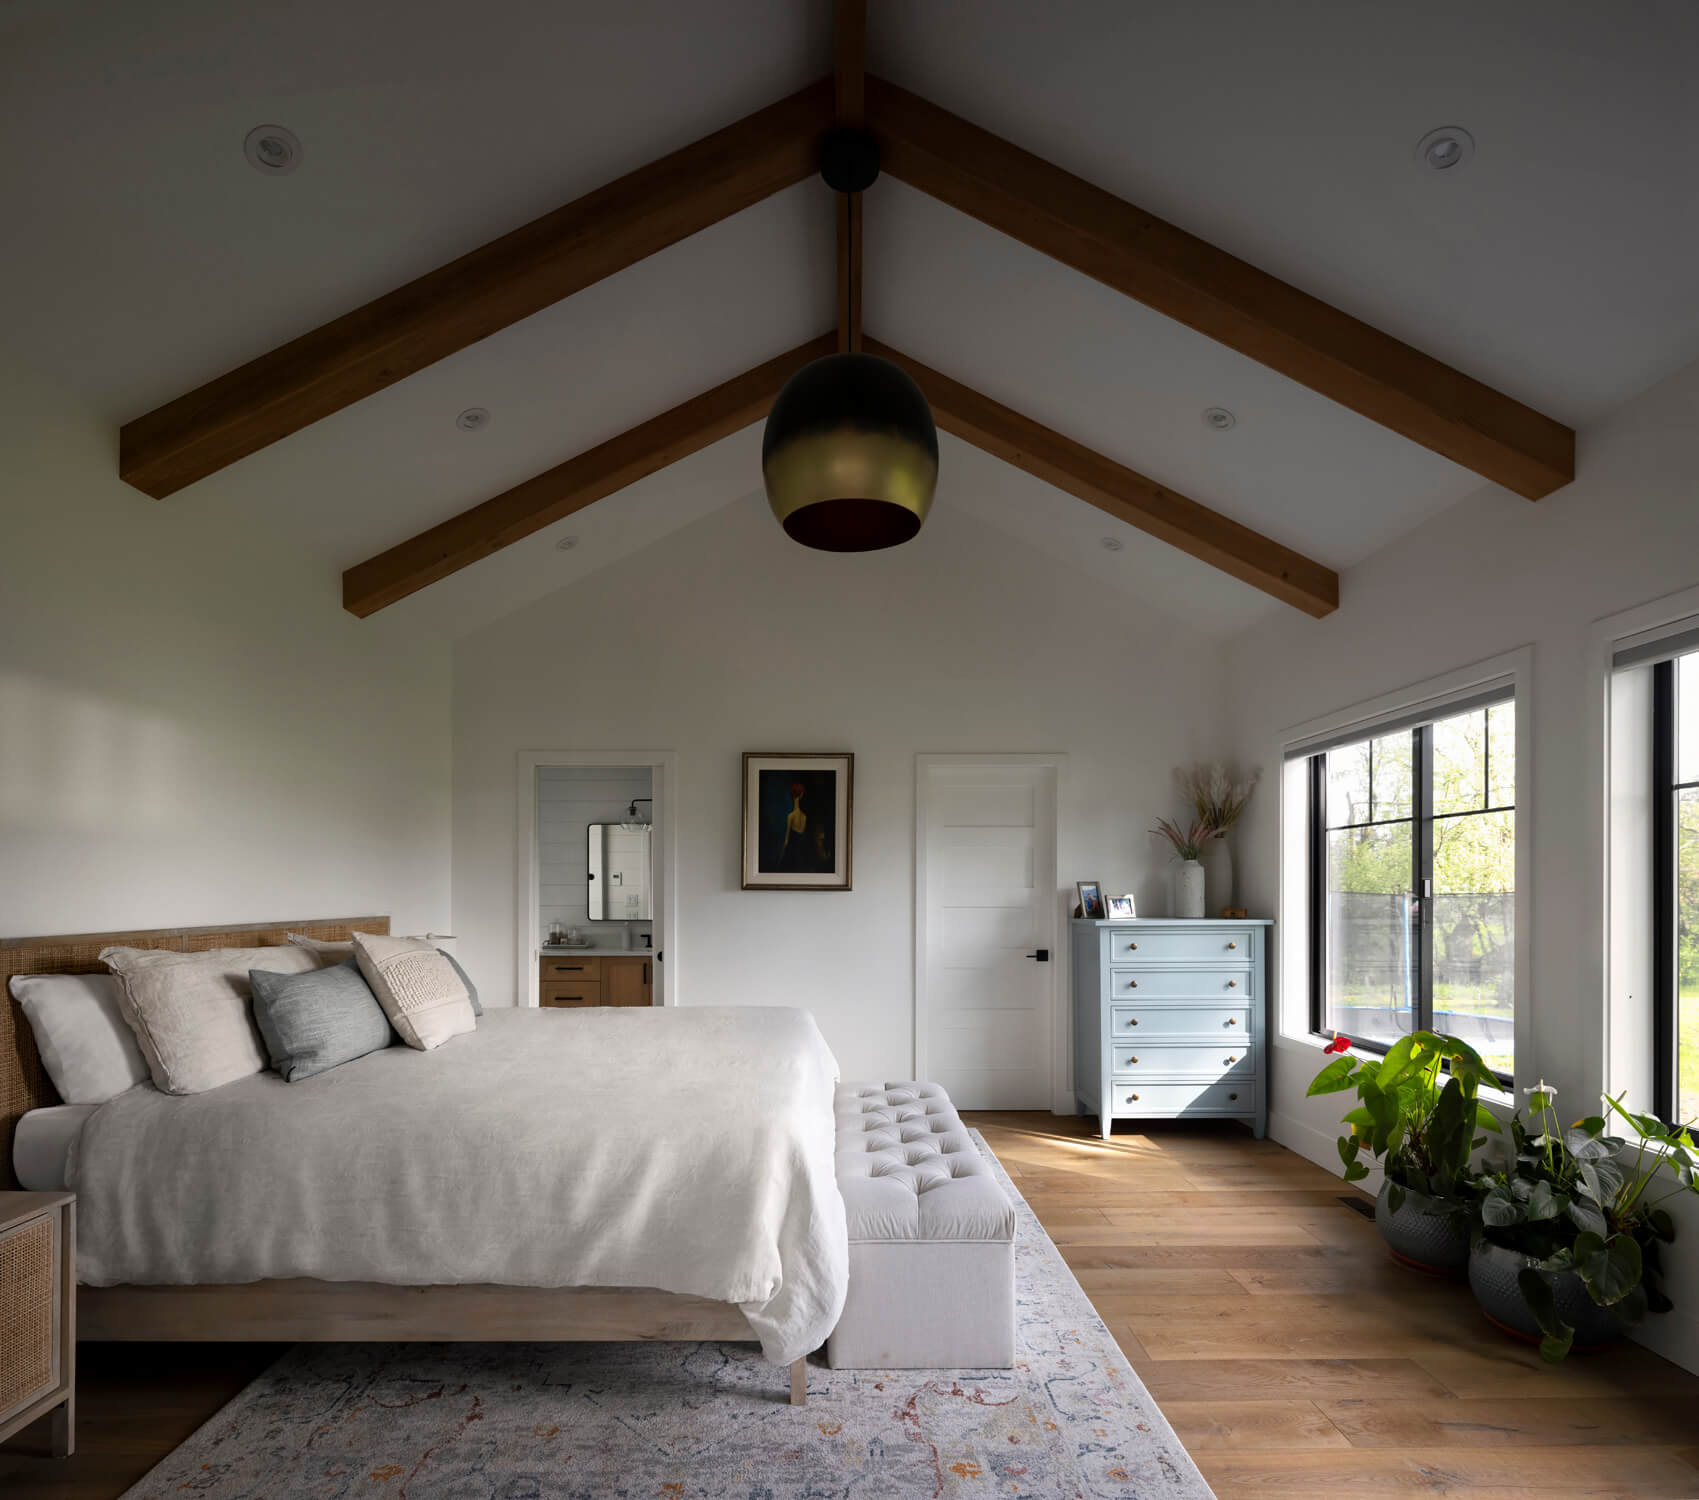 Reclaimed wooden beams featured in the ceiling of a bright modern bedroom.